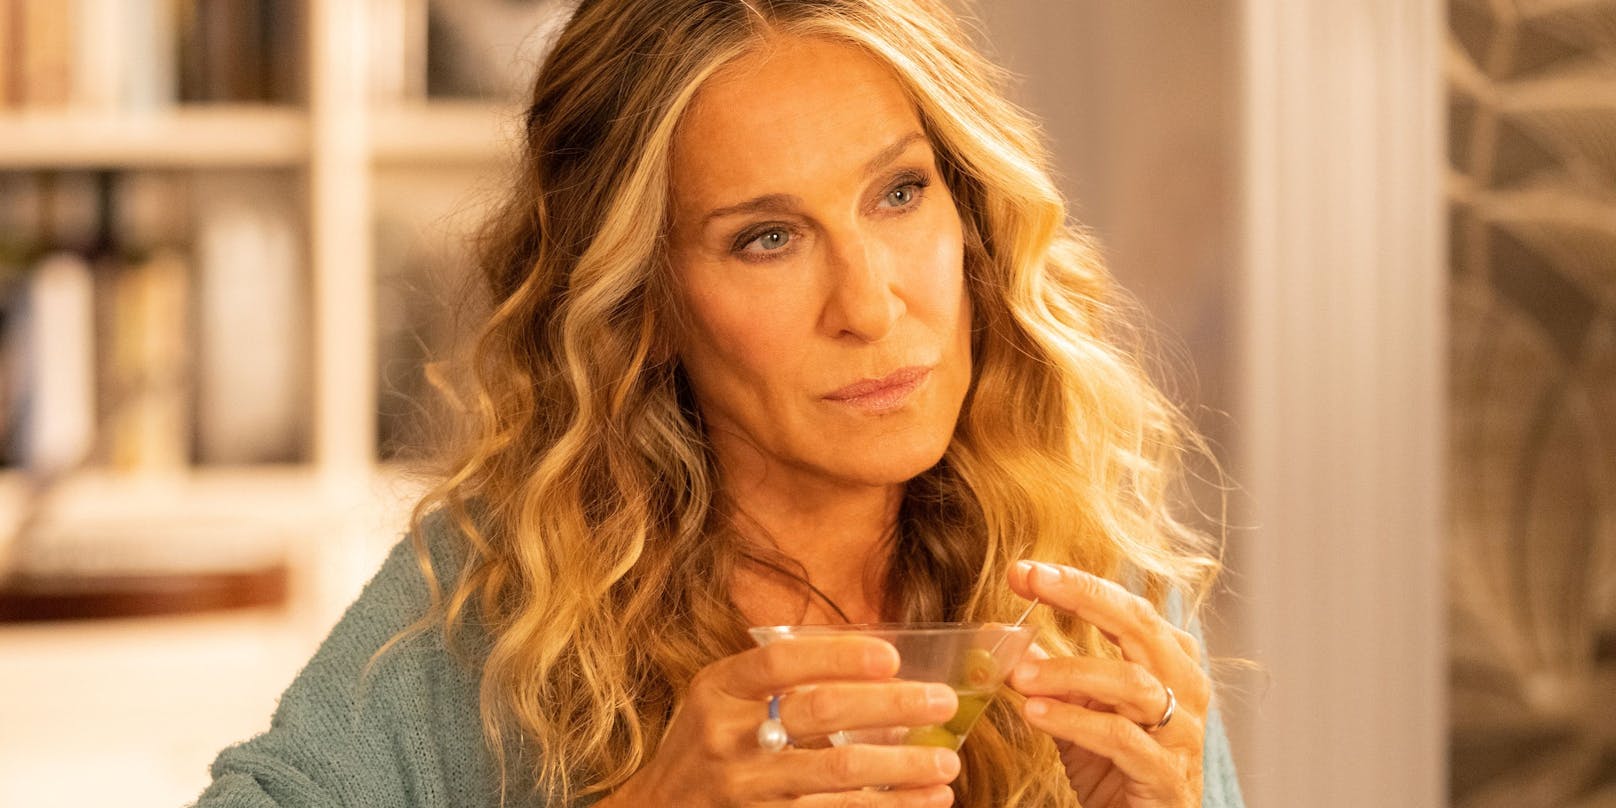 Sarah Jessica Parker als Carrie Bradshaw in "And Just Like That...".